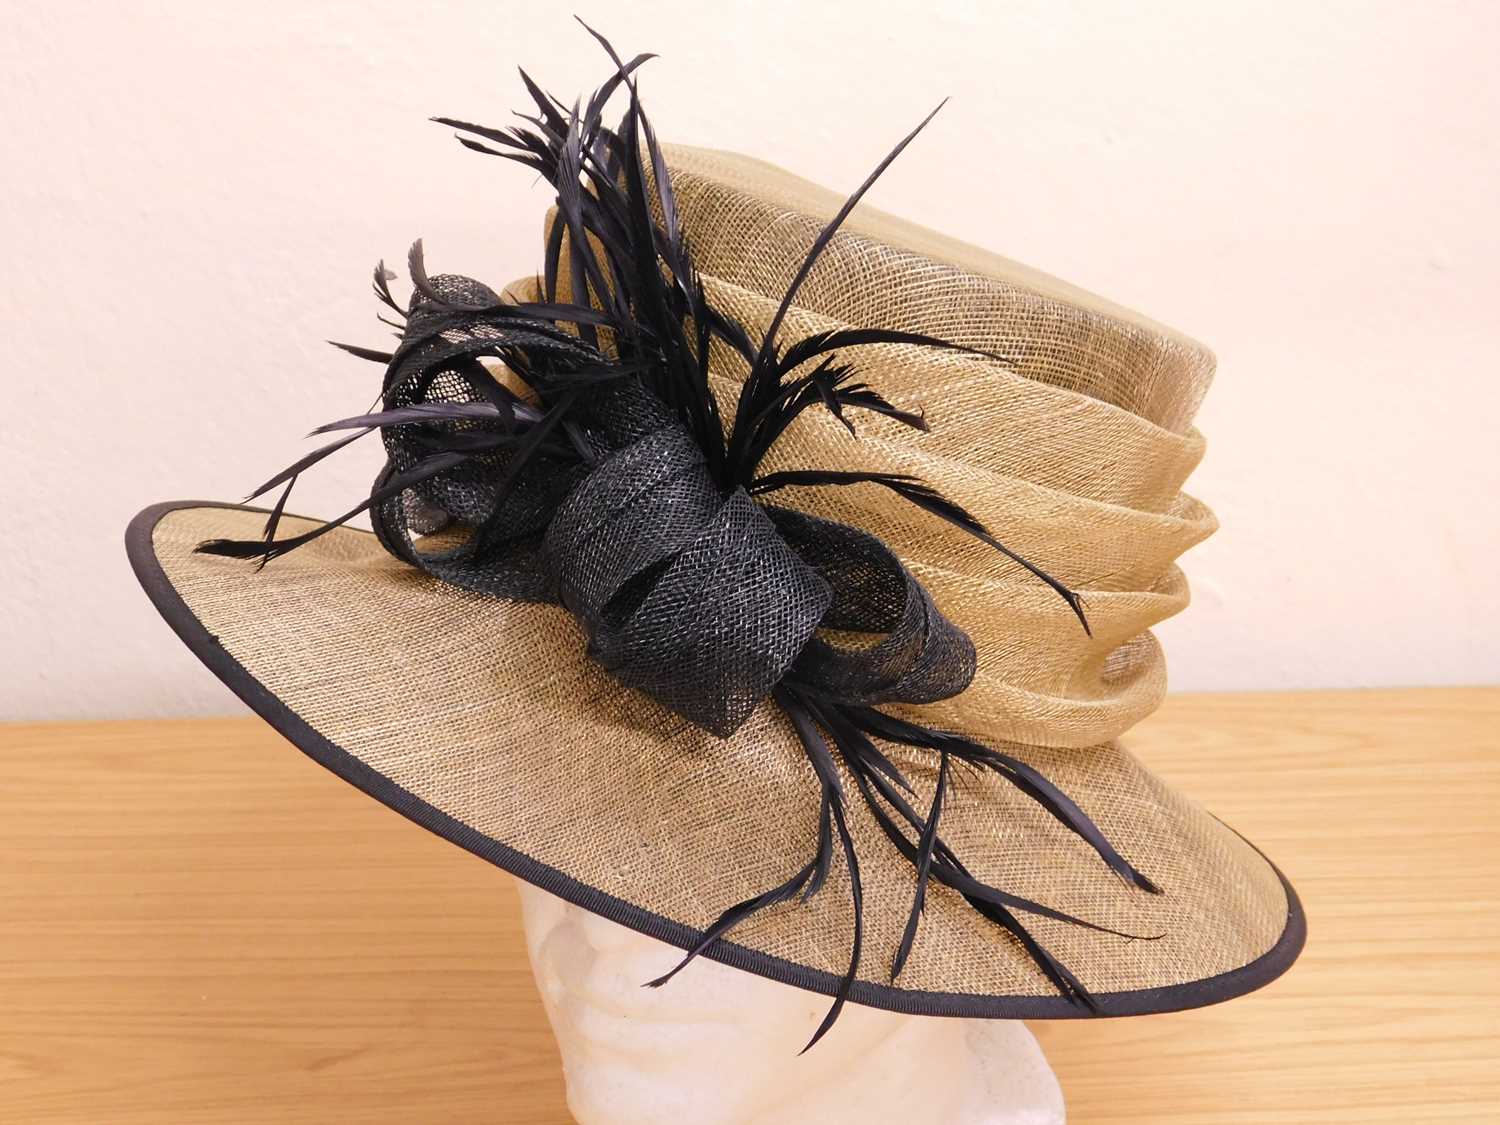 A Cappelli Condici straw hat in old gold and black detail, new with tags - Image 2 of 3